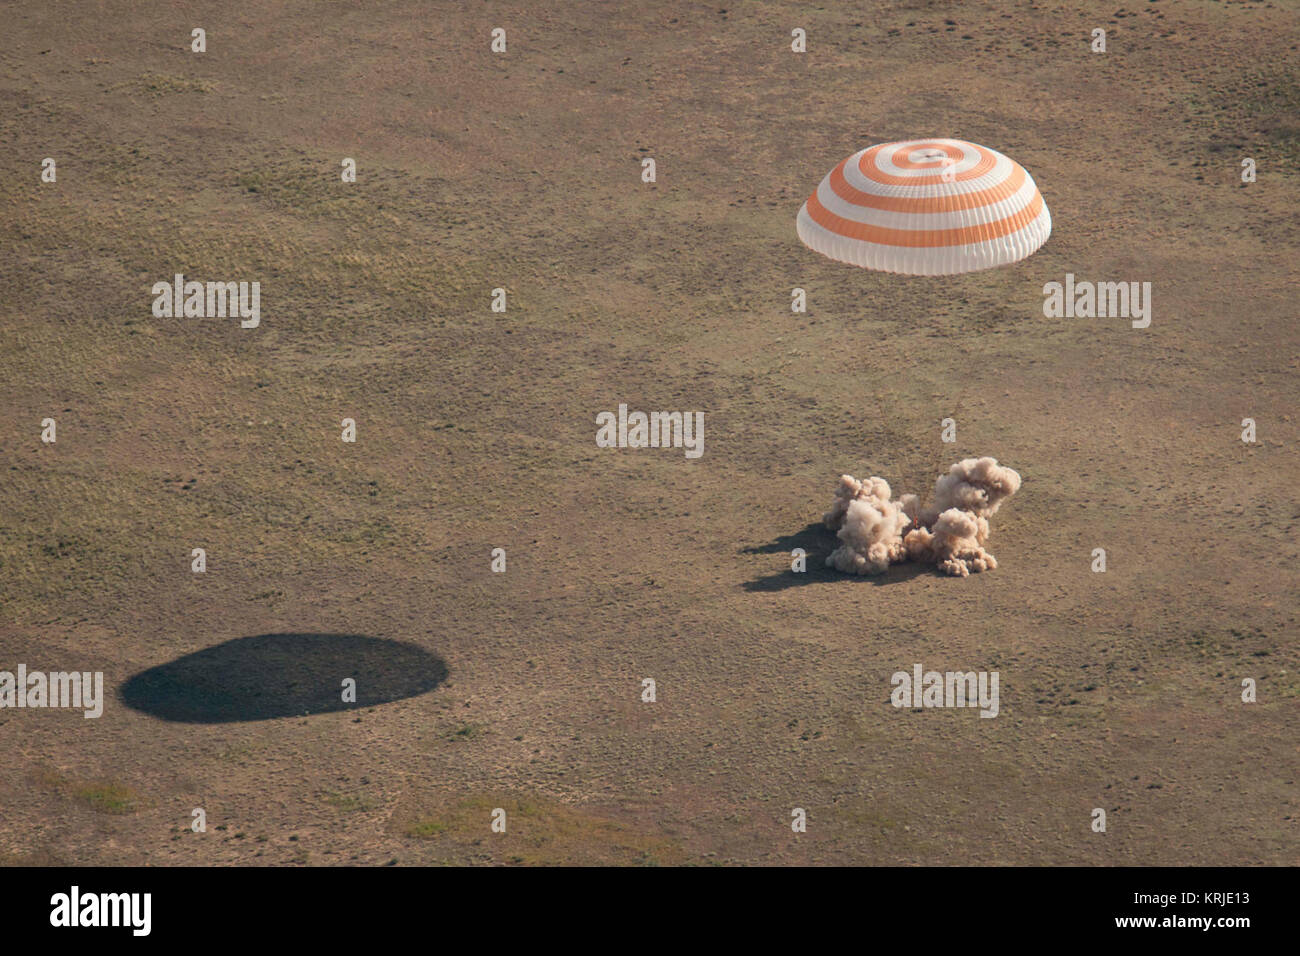 The Soyuz TMA-20 spacecraft is seen as it lands with Expedition 27 Commander Dmitry Kondratyev and Flight Engineers Paolo Nespoli and Cady Coleman in a remote area southeast of the town of Zhezkazgan, Kazakhstan, on Tuesday, May 24, 2011.   NASA Astronaut Coleman, Russian Cosmonaut Kondratyev and Italian Astronaut Nespoli are returning from more than five months onboard the International Space Station where they served as members of the Expedition 26 and 27 crews. Photo Credit: (NASA/Bill Ingalls) Soyuz TMA-20 landing Stock Photo